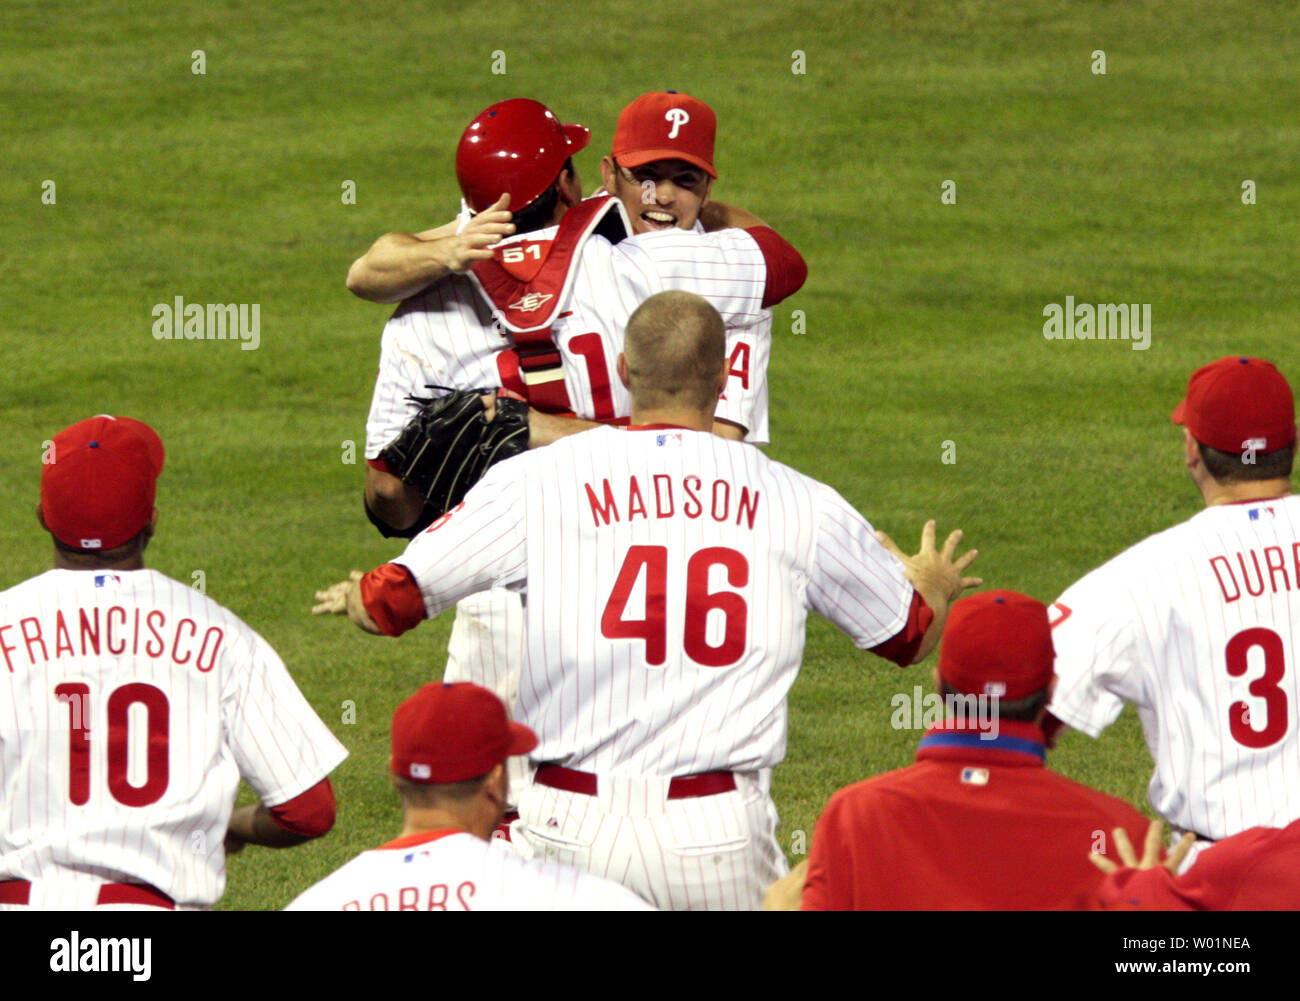 Philadelphia Phillies team members surge from the dugout and surround  closing pitcher Brad Lidge following their 10-4 win over the Los Angeles Dodgers in game five of the National League Championship Series in Philadelphia on October 21, 2009. Hugging Lidge is catcher Carlos Ruiz and running up to him are Ben Francisco, Ryan Madson and Rich Dubee (far right).      .      UPI/Eileen Angelino Stock Photo